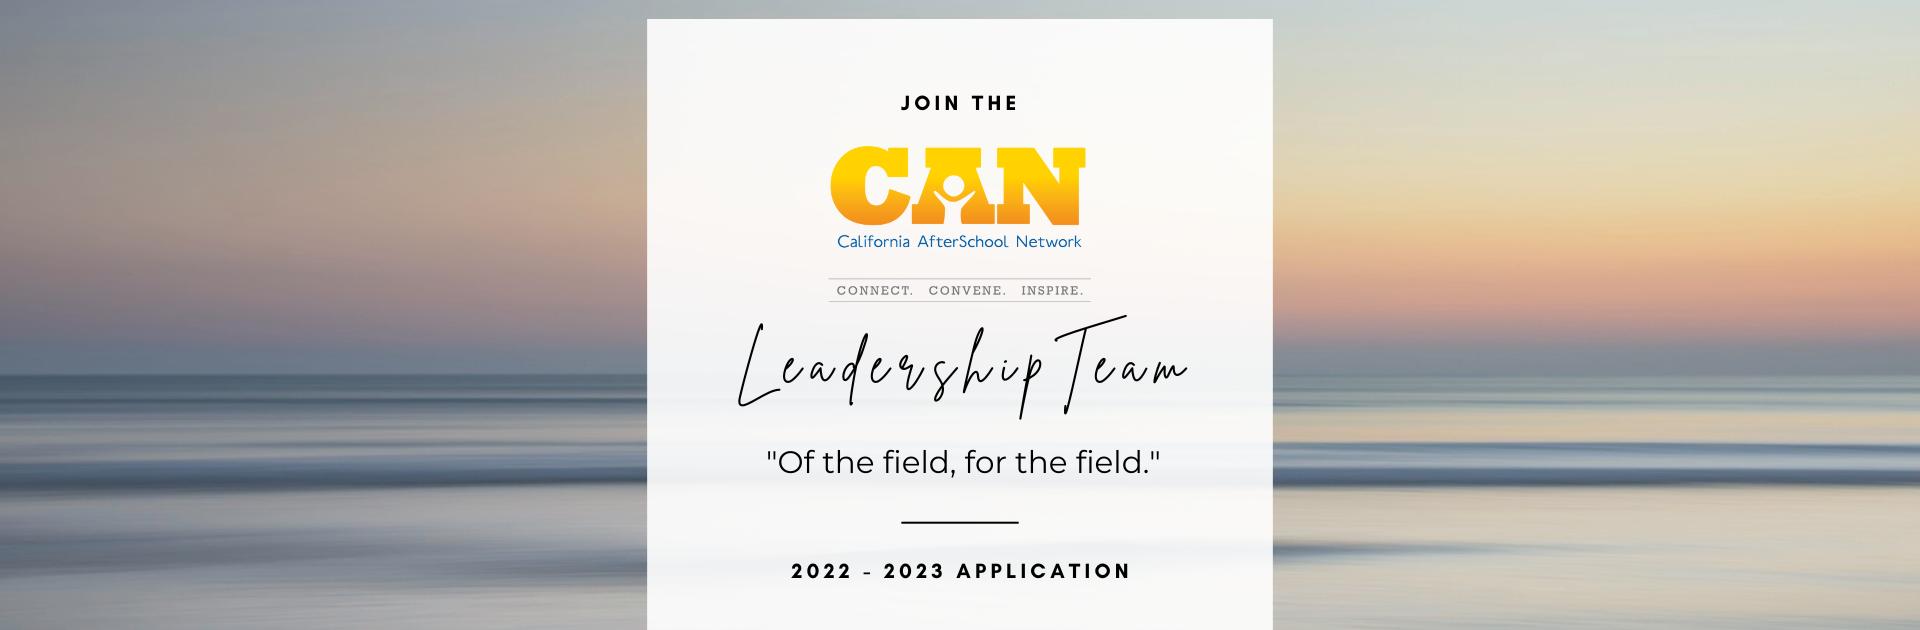 Join the CAN Leadership Team 